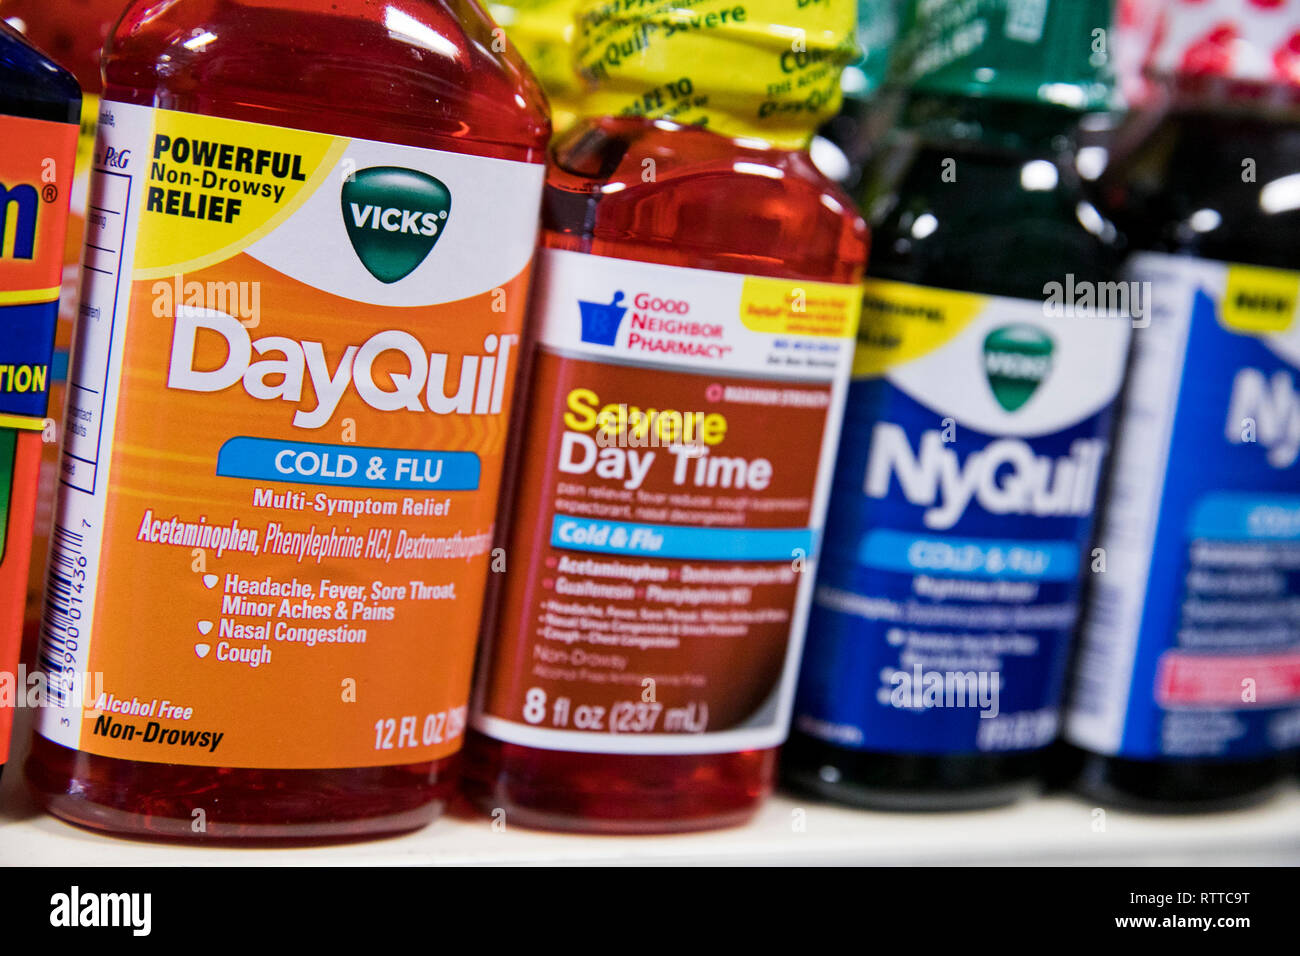 E NyQuil DayQuil over-the-counter medicina fredda fotografato. Foto Stock